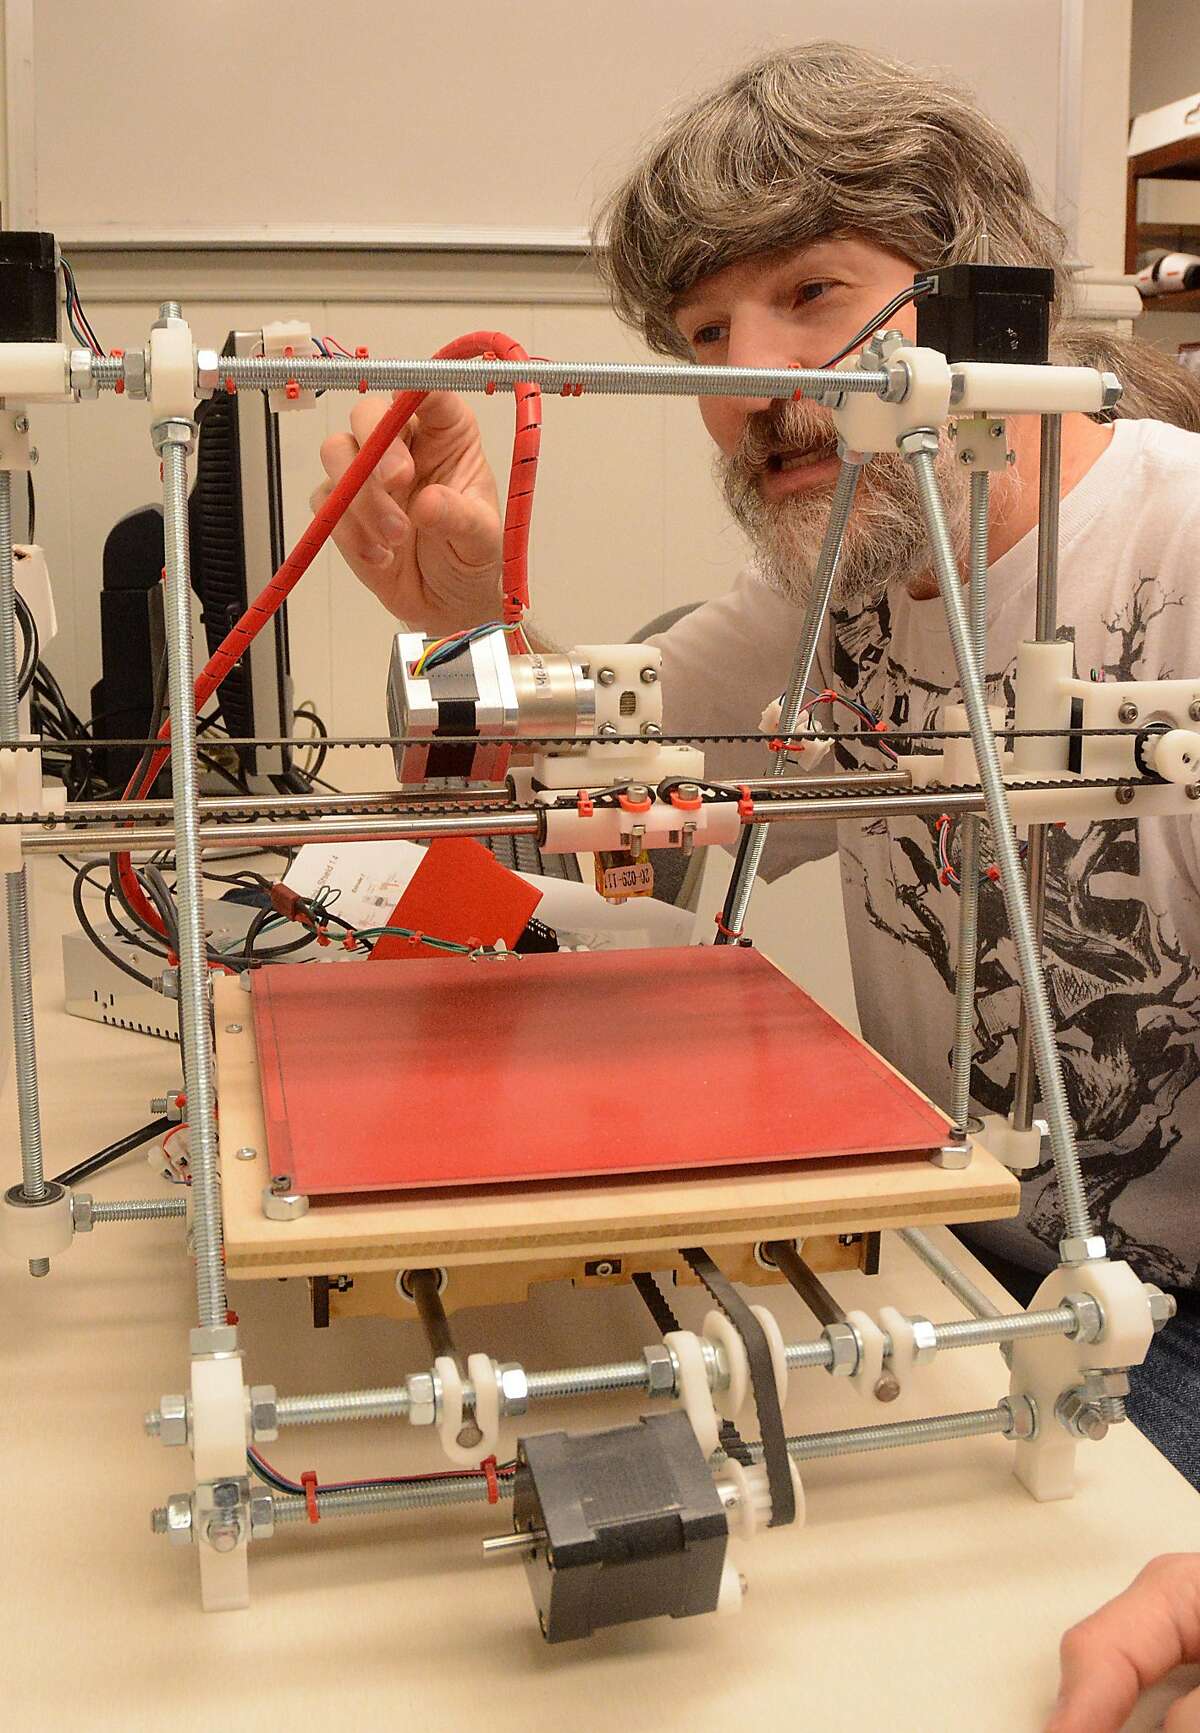 Senior Volunteer coordinator James Husum, of Spring, works on a 3-D Laser printer kit he is making at the Proto Makerspace, 22820 Interstate 45 suite 2D in Spring, weekly open house. Photograph by David Hopper